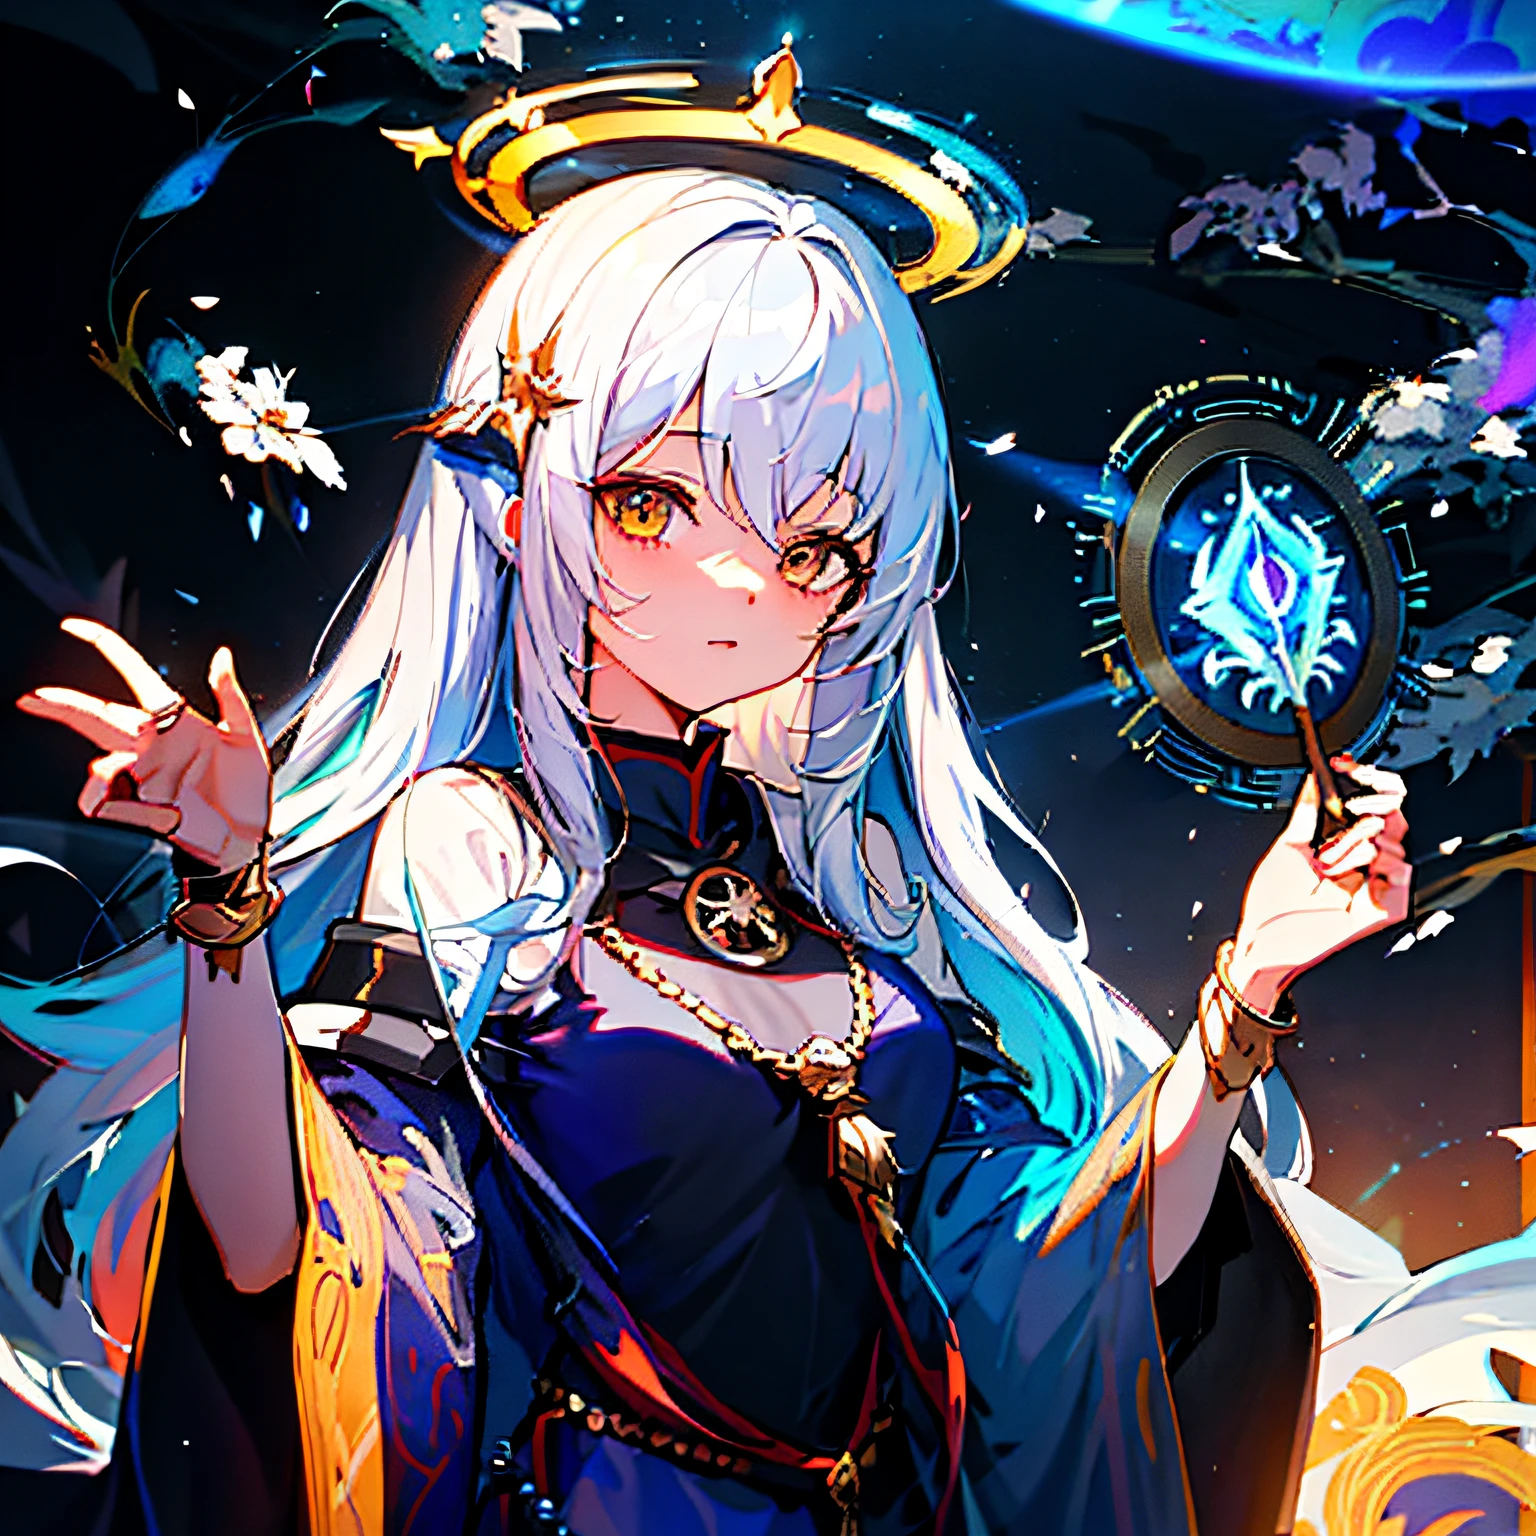 Anime - a stylistic image of a woman wearing a crown and an aura, white-haired god, Anime goddess, npc with a saint's halo, Guweiz in Pixiv ArtStation, Guweiz on ArtStation Pixiv, NPCs and saints\of halos, Guviz-style artwork, shadowverse style, trending on artstation pixiv